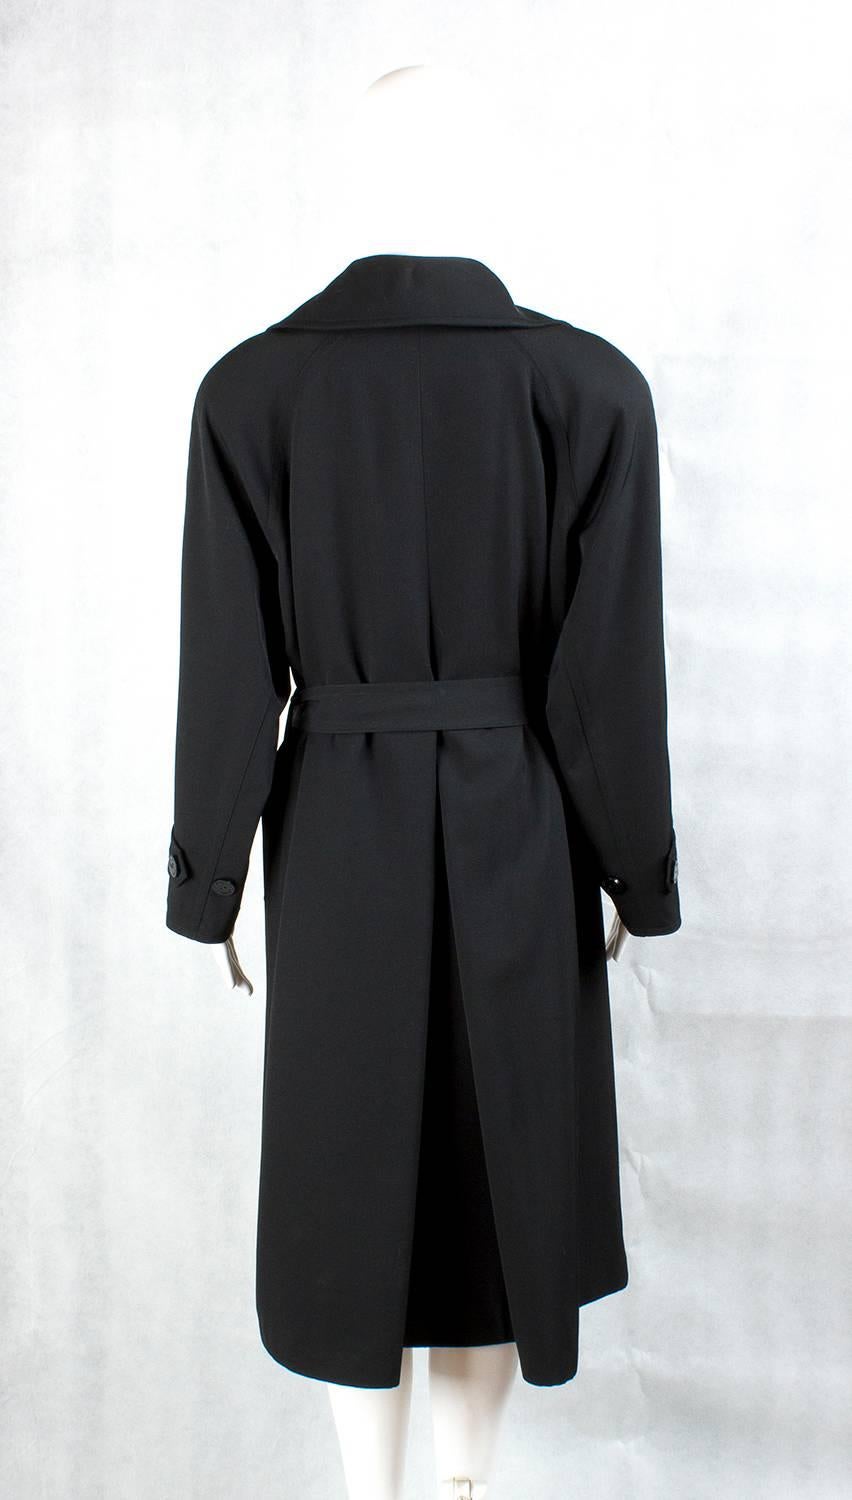 Chanel vintage Double Breasted black wool trench coat, 1990s

Material: 100% Wool

Color : Black

Main Closure: Button closure on the front

Pockets: 2 flap pockets to the waist

Internal lining: Black 100% silk lining with chanel logo

Size: no